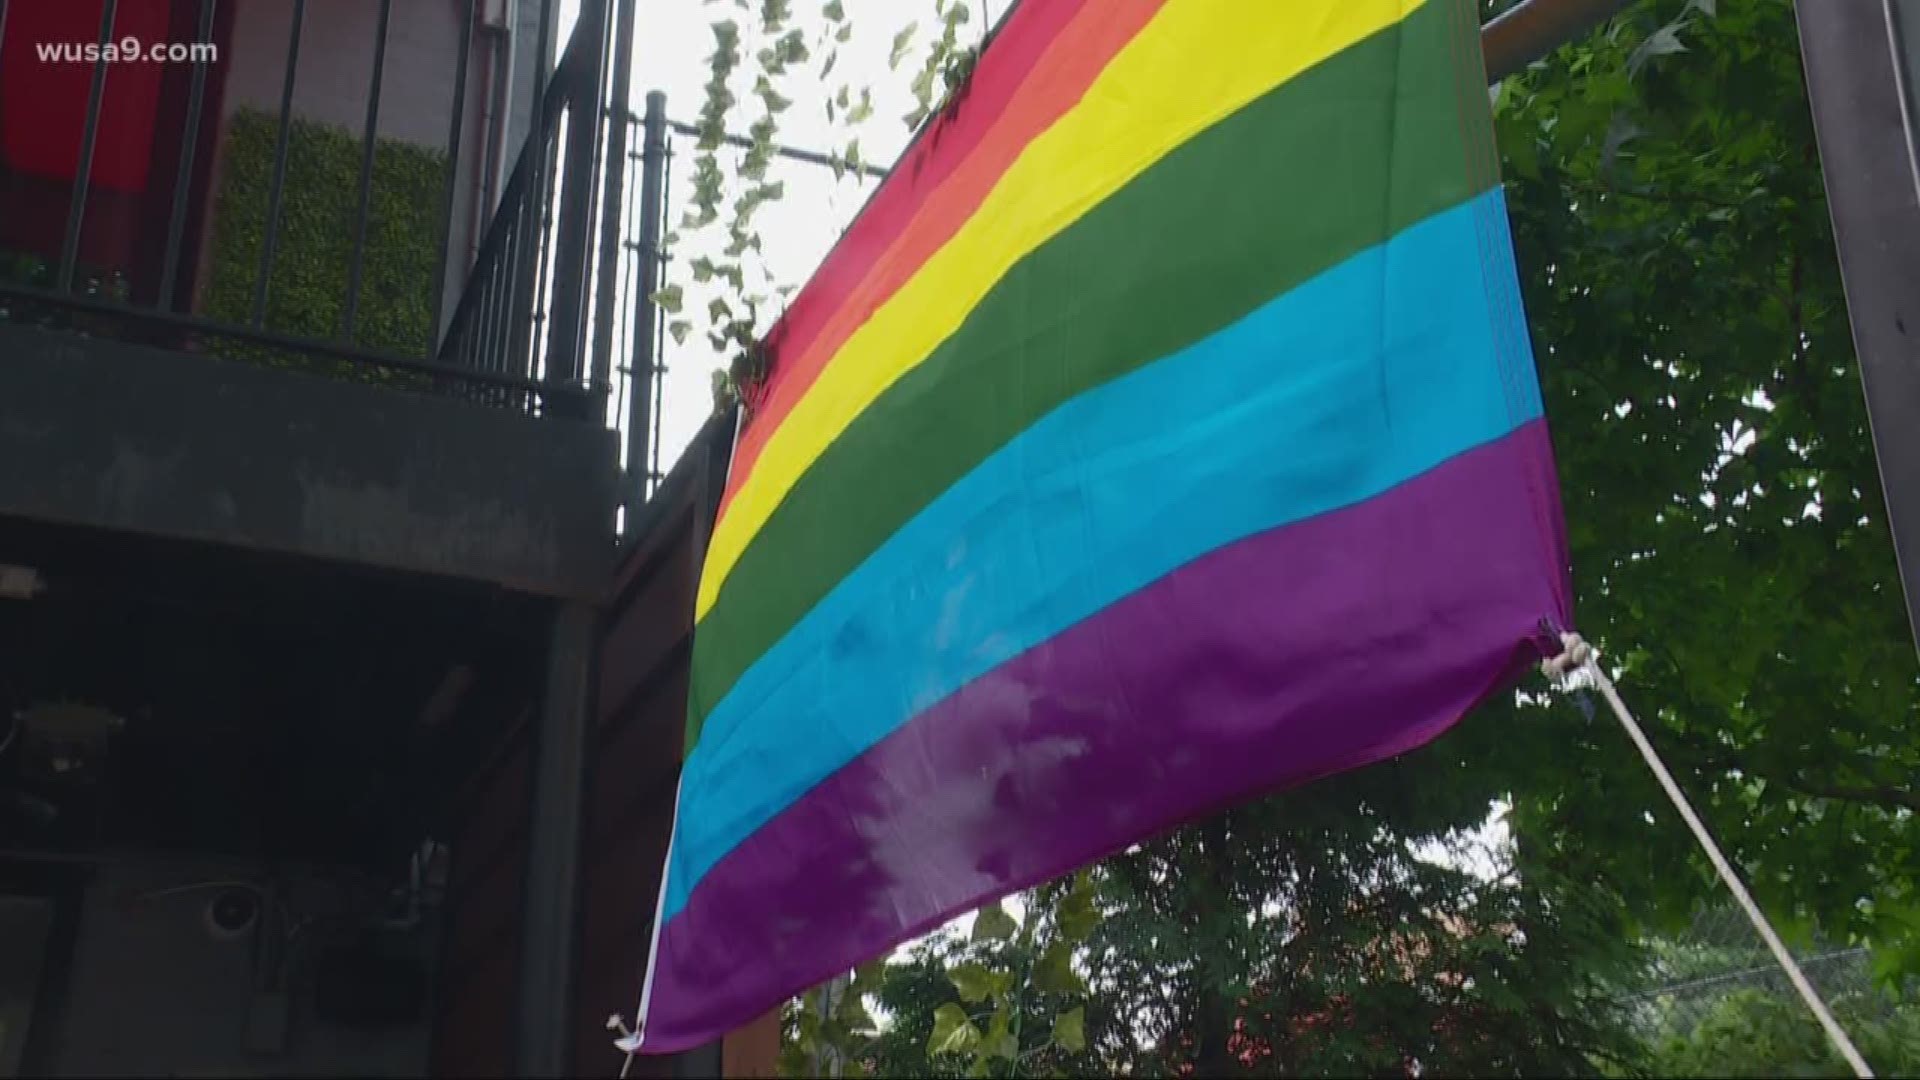 The uptick comes after several recent hate crimes were committed against members of the LGBT community in the DMV.